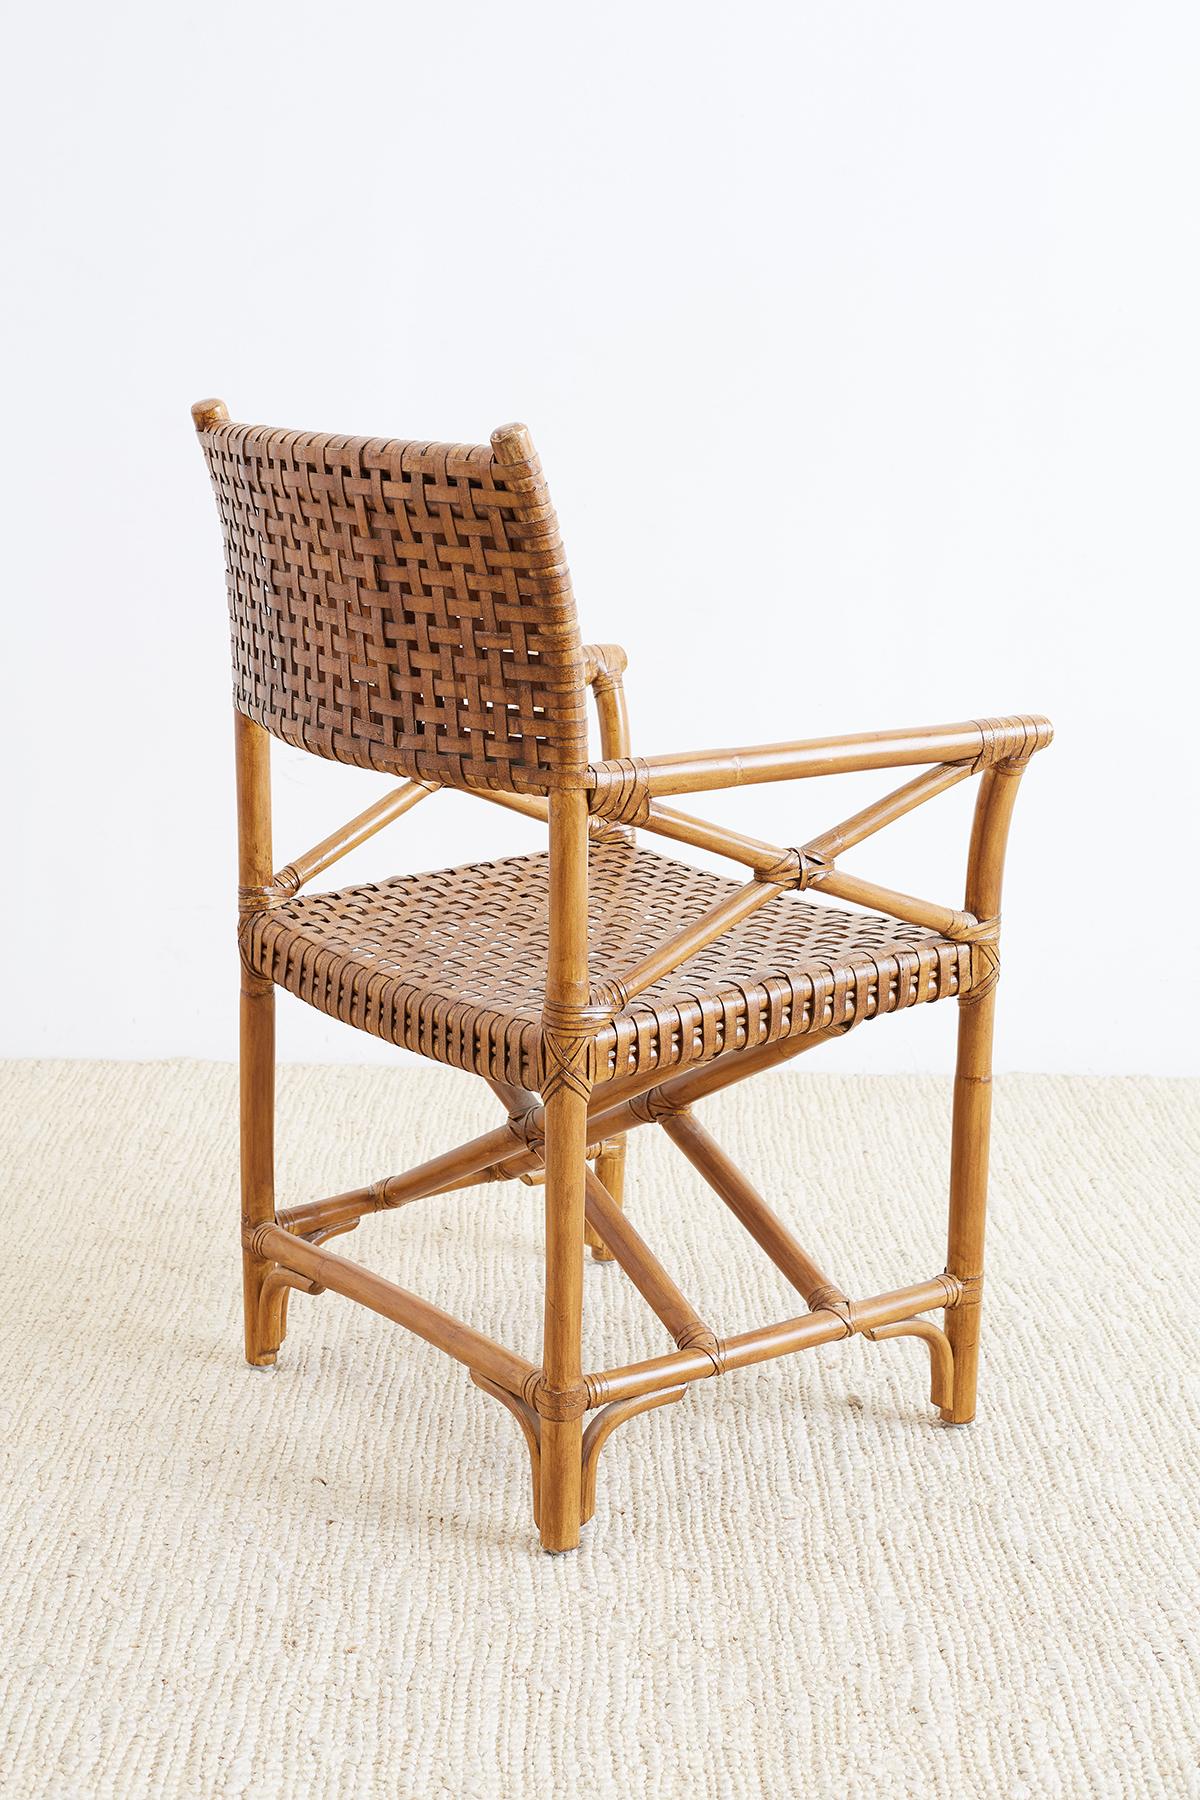 Hand-Crafted McGuire Style Woven Leather Rattan Dining Chairs